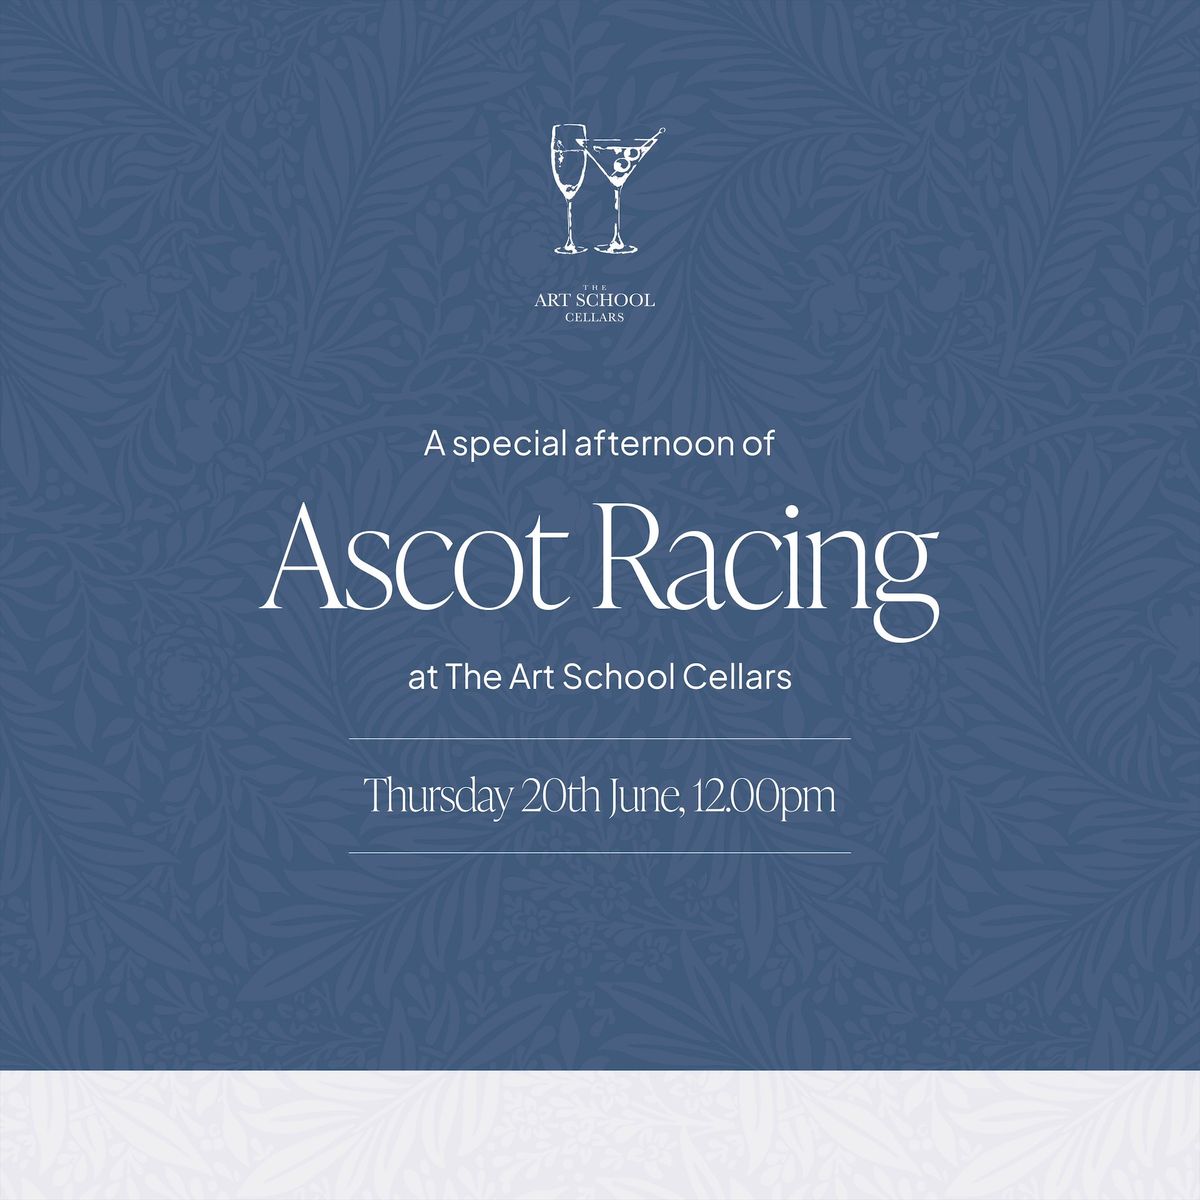 A Special Afternoon of Ascot Racing in the Art School Cellars